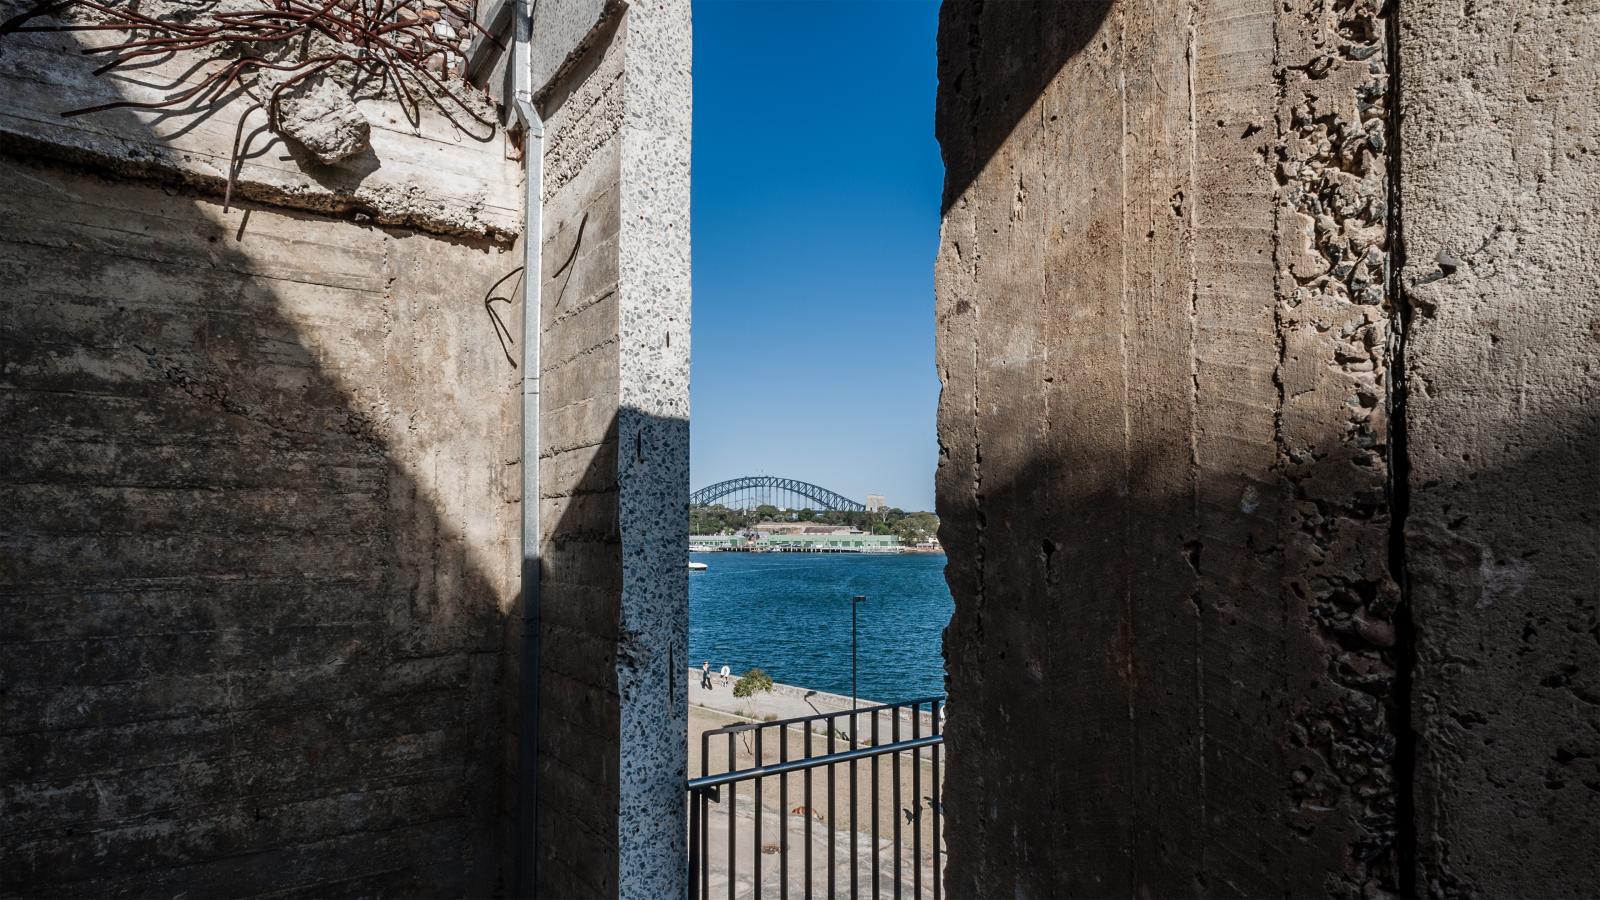 A view of a bridge framed by tall, textured concrete walls in Ballast Point Park. Between the walls, there's a body of water with a boat and part of a railing in the foreground. The sky is clear and blue.